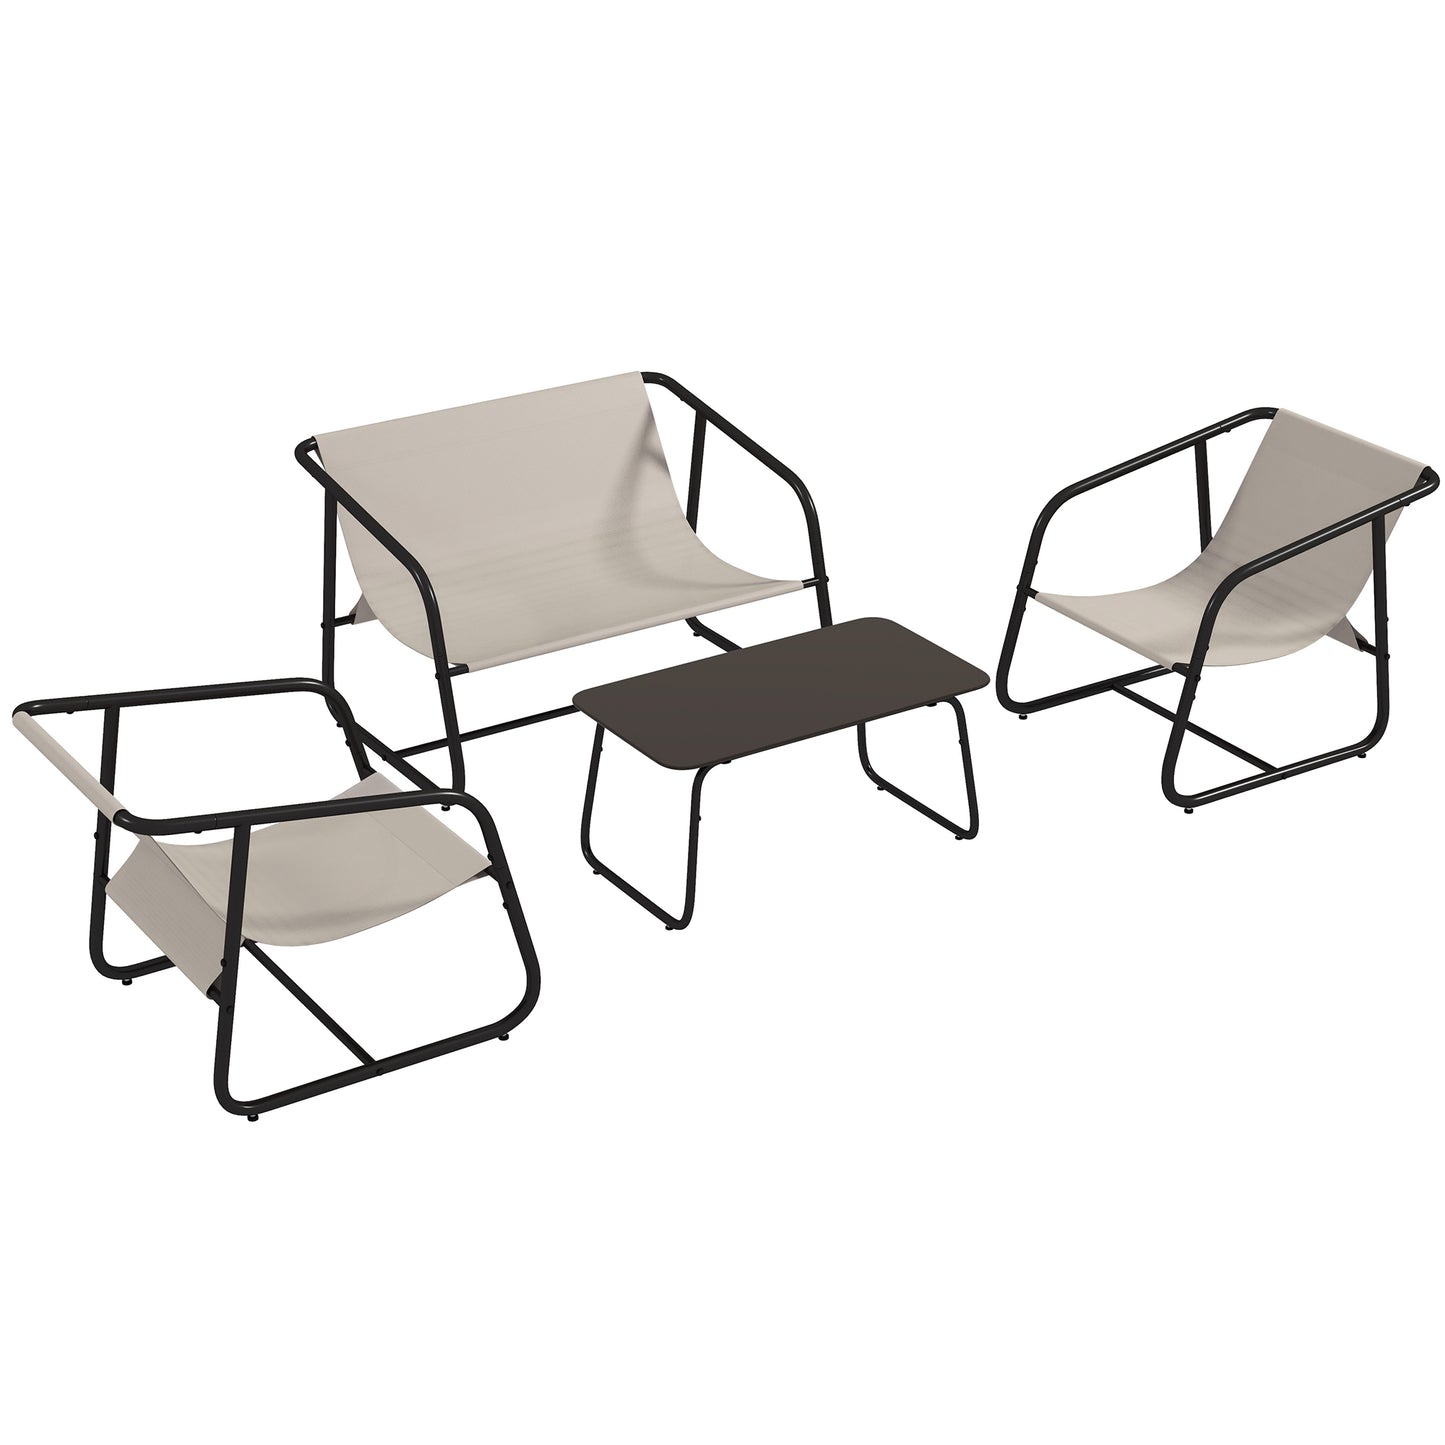 Outsunny Garden Sofa Set, 4 Piece Patio Conversation Furniture Set with Glass Table, Breathable Mesh, Cream White